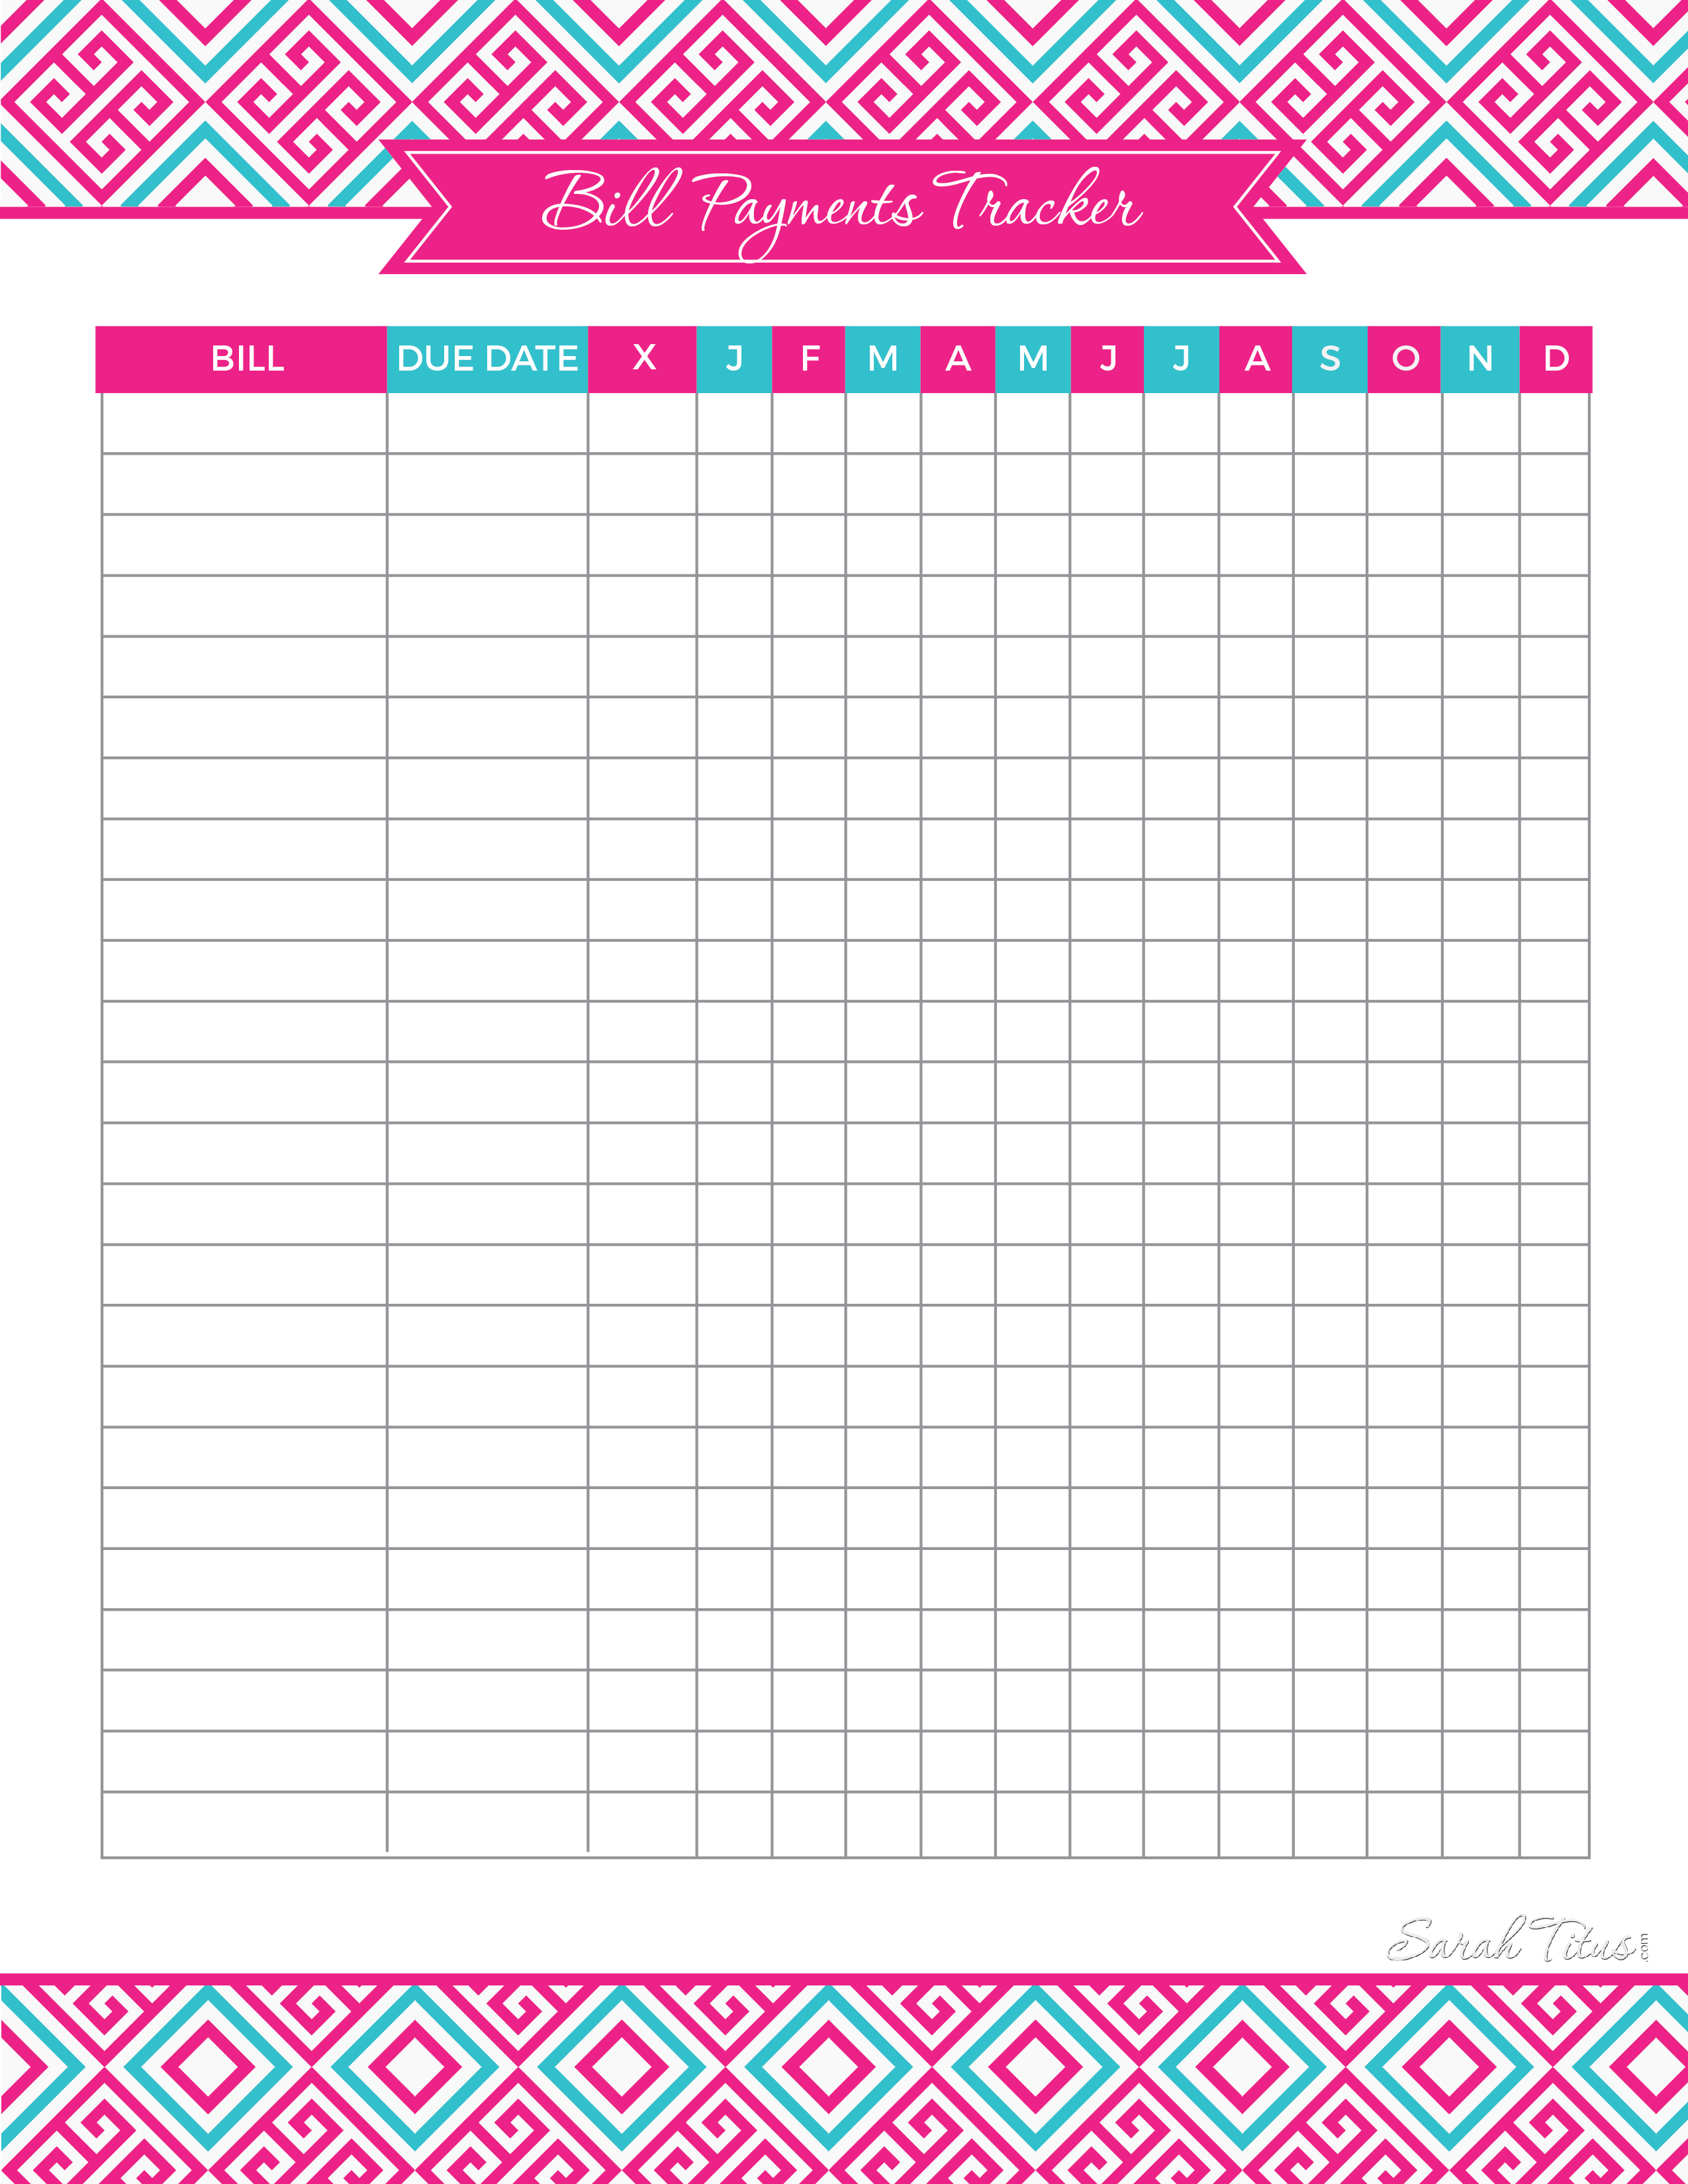 How To Create A Budget That Works For You - Sarah Titus - Free Printable Bill Tracker